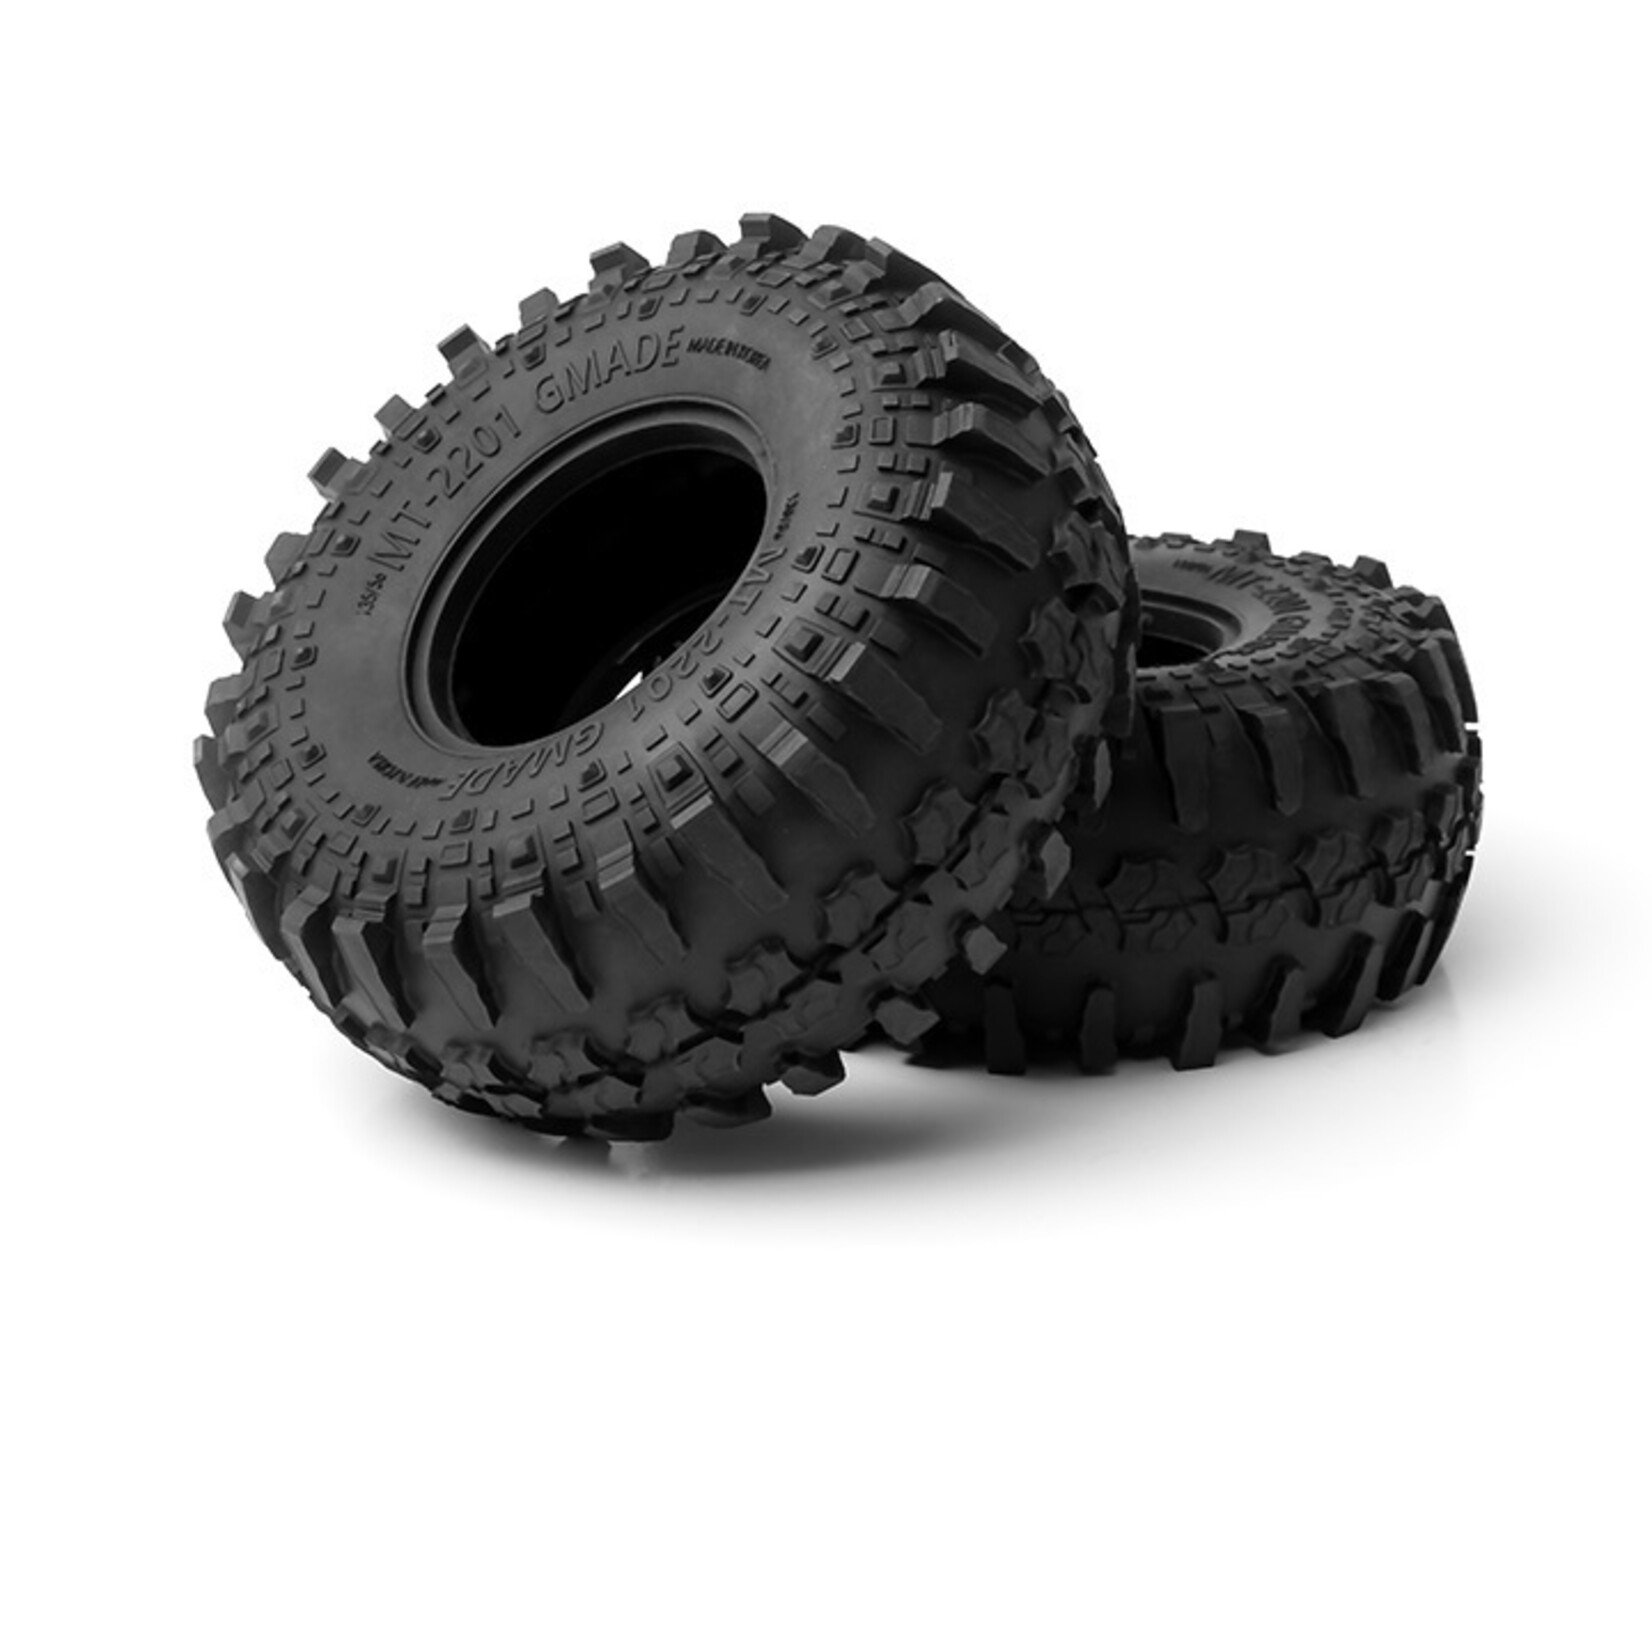 Gmade MT2201 2.2 Off-Road Tires (2)